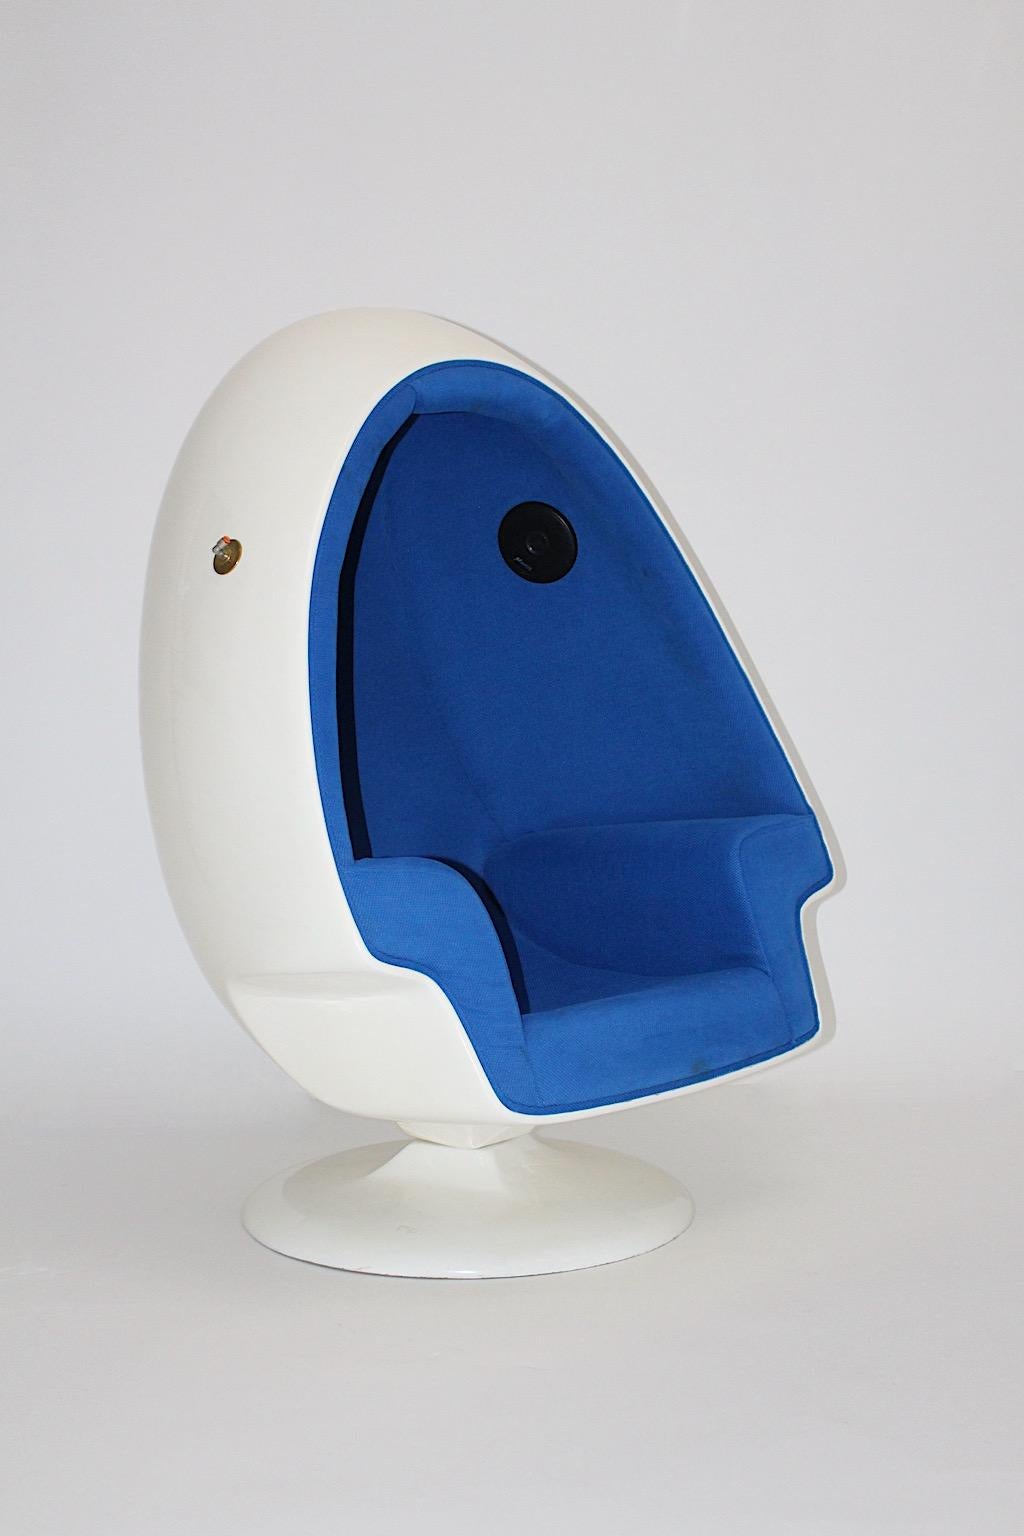 Space Age white fiberglass vintage lounge chair in egg like shape, which features a swiveling function.
The interior is upholstered and covered in cobalt blue structured textile fabric, while the surface was made of white lacquered fiberglass.
Also